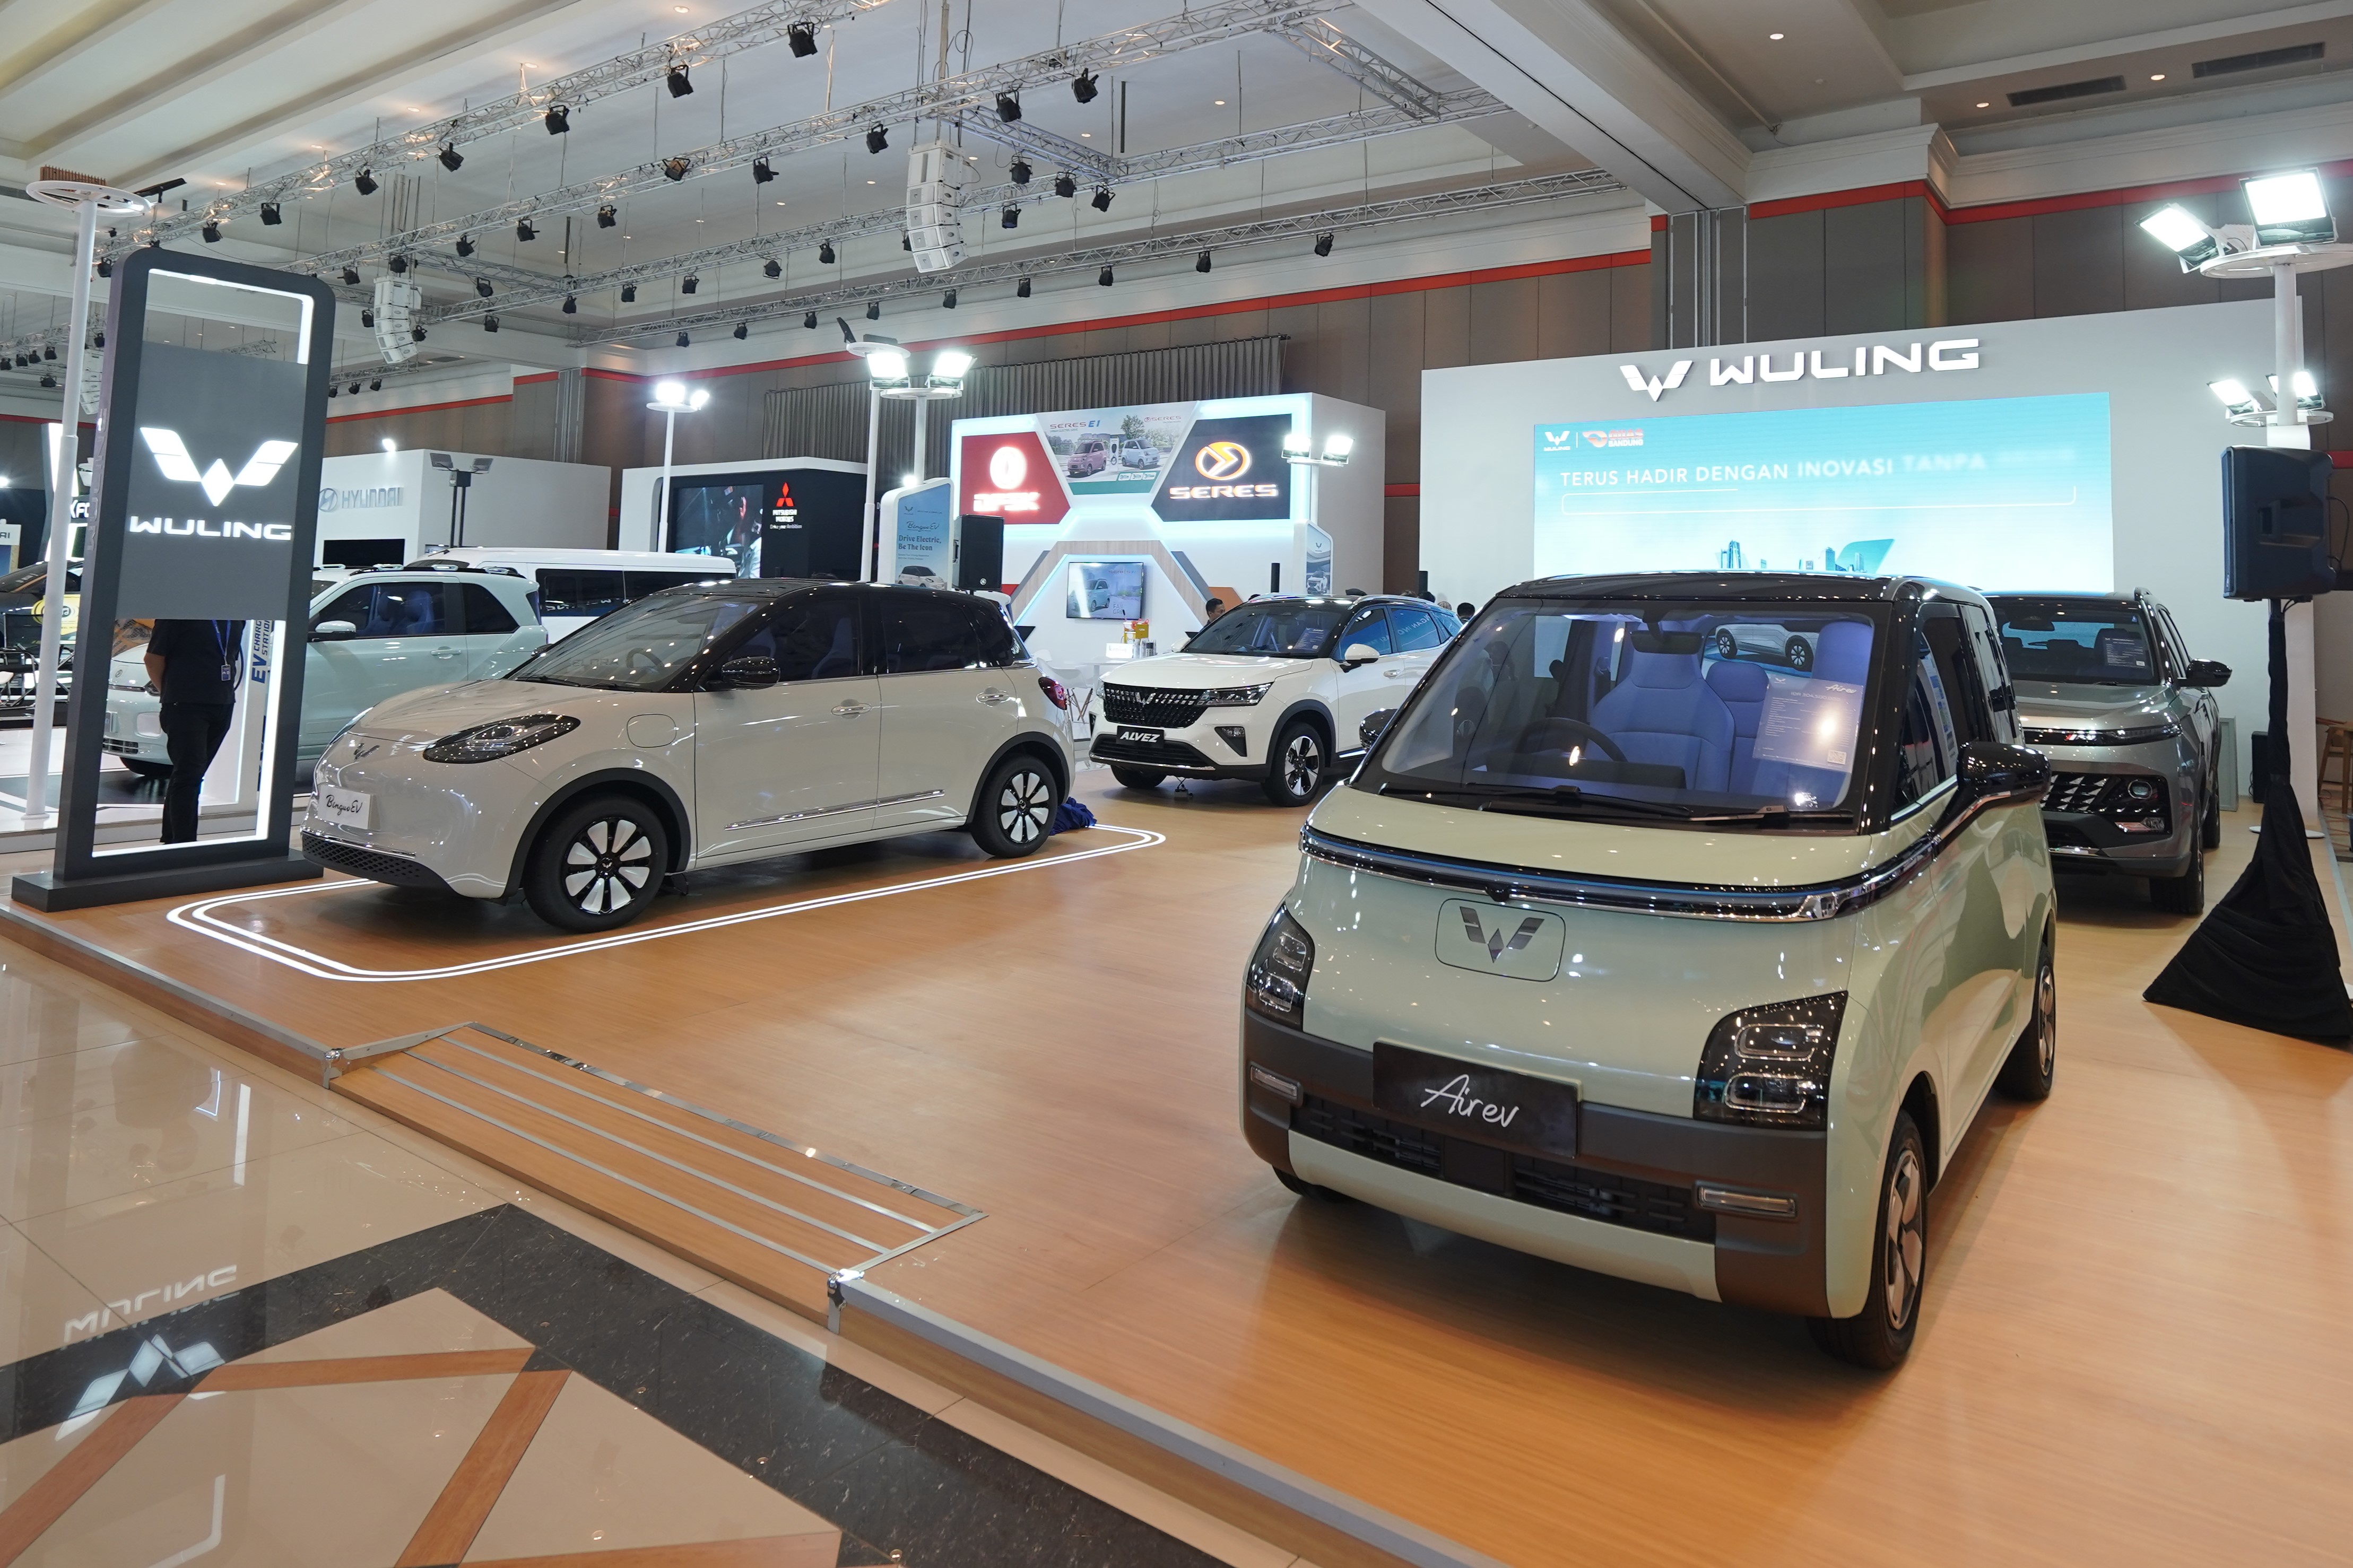 Image Wuling Enliven GIIAS Bandung with Attractive Promos and Complete Test Drive